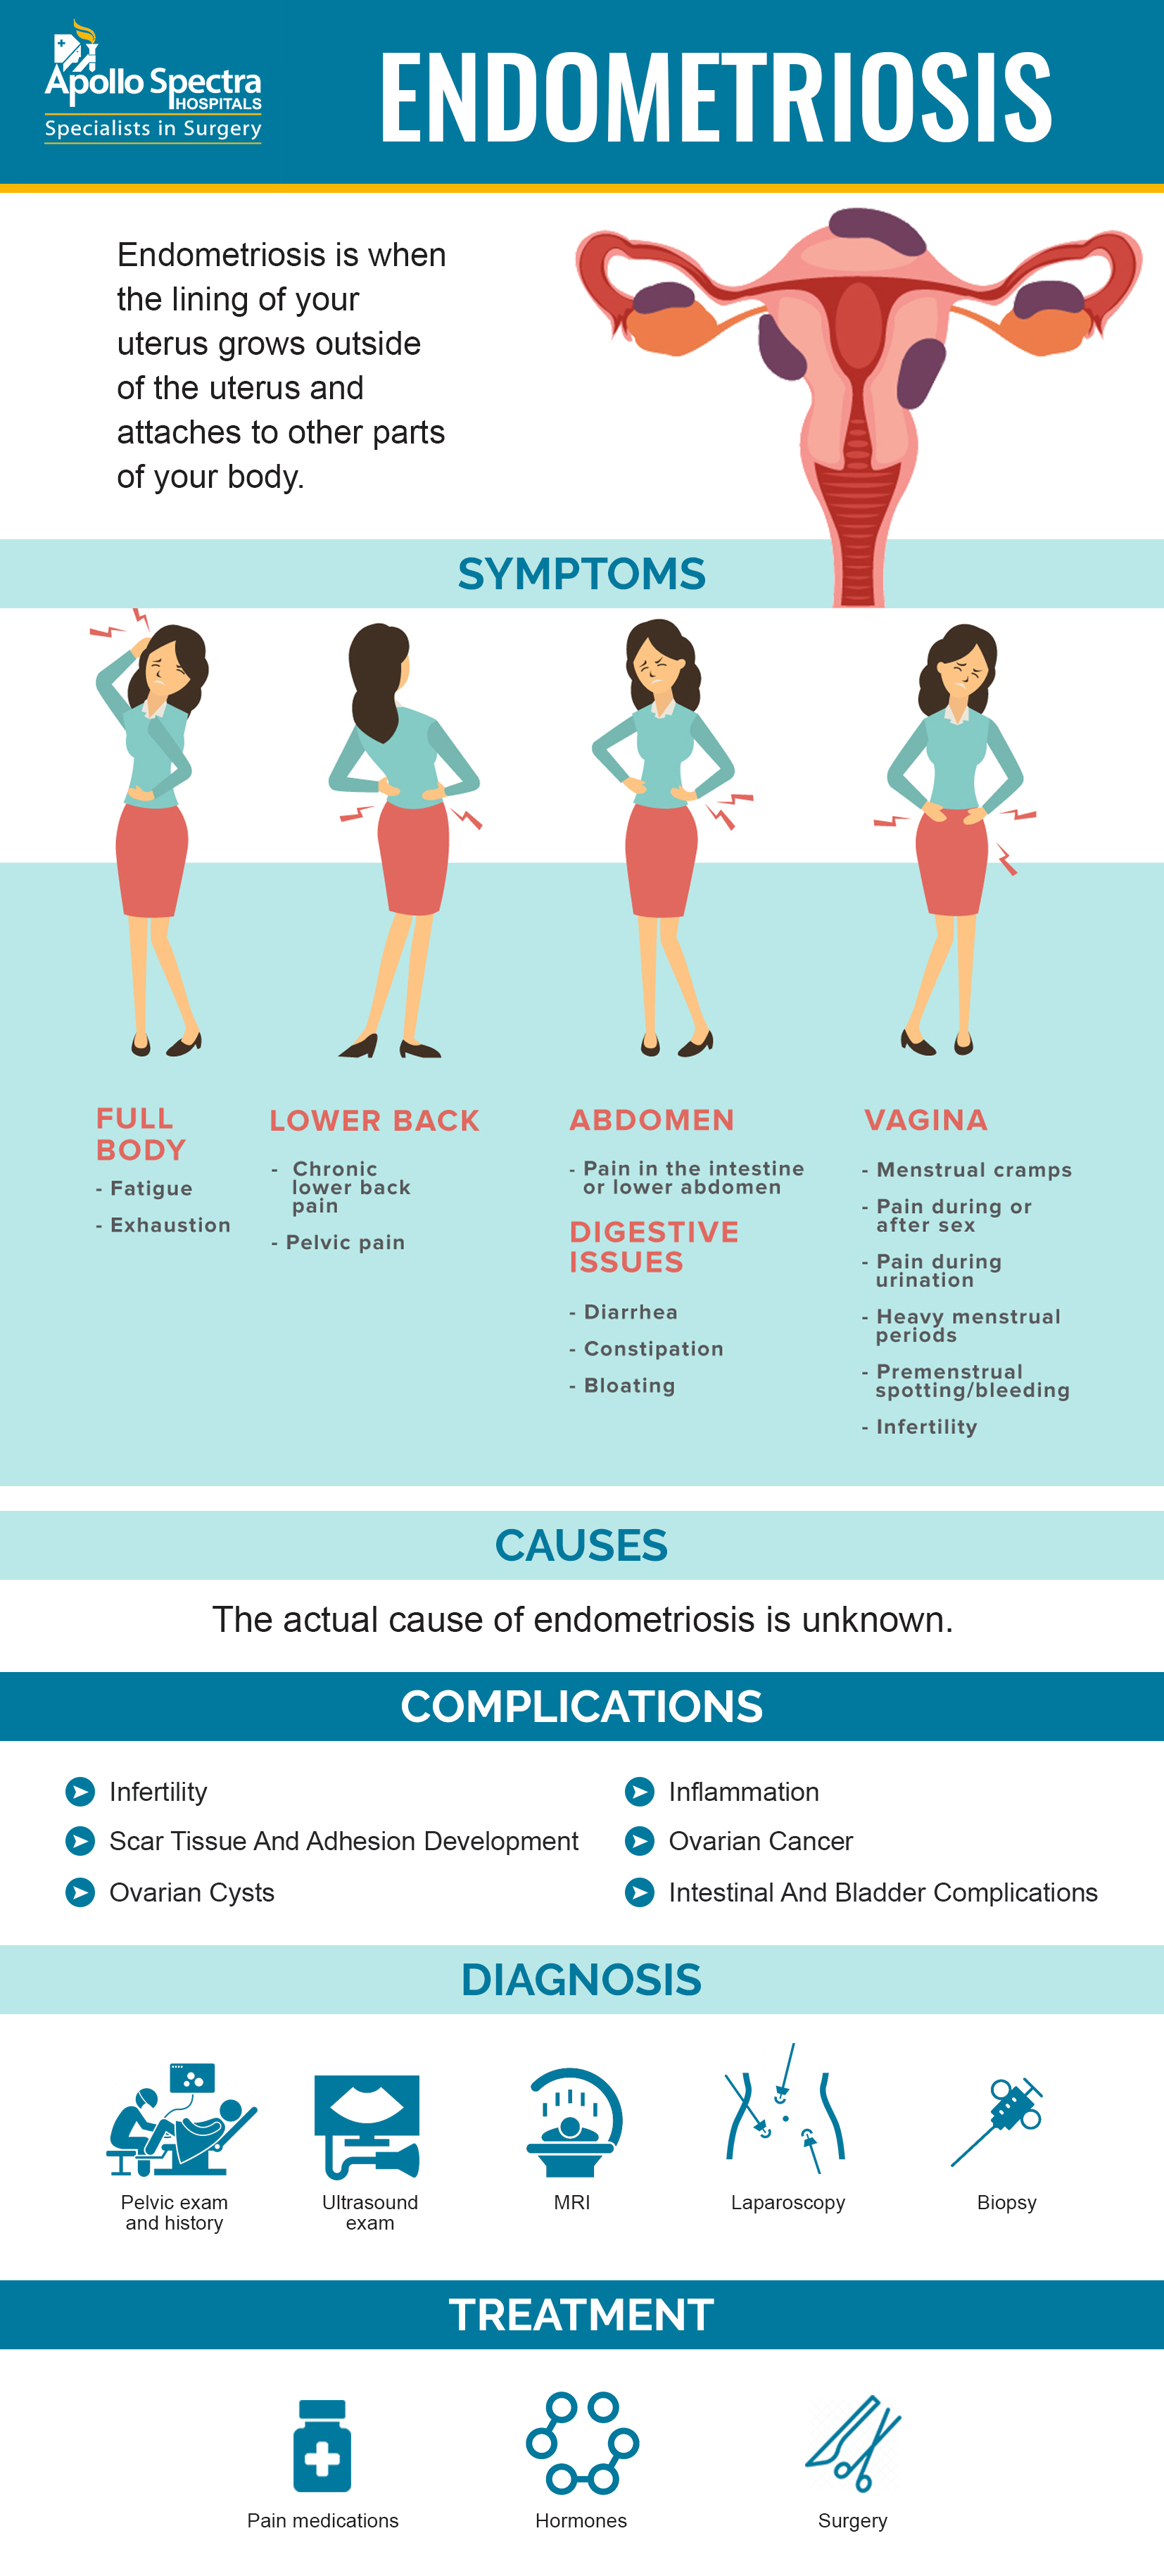 What is Endometriosis and its key Symptoms & Causes?